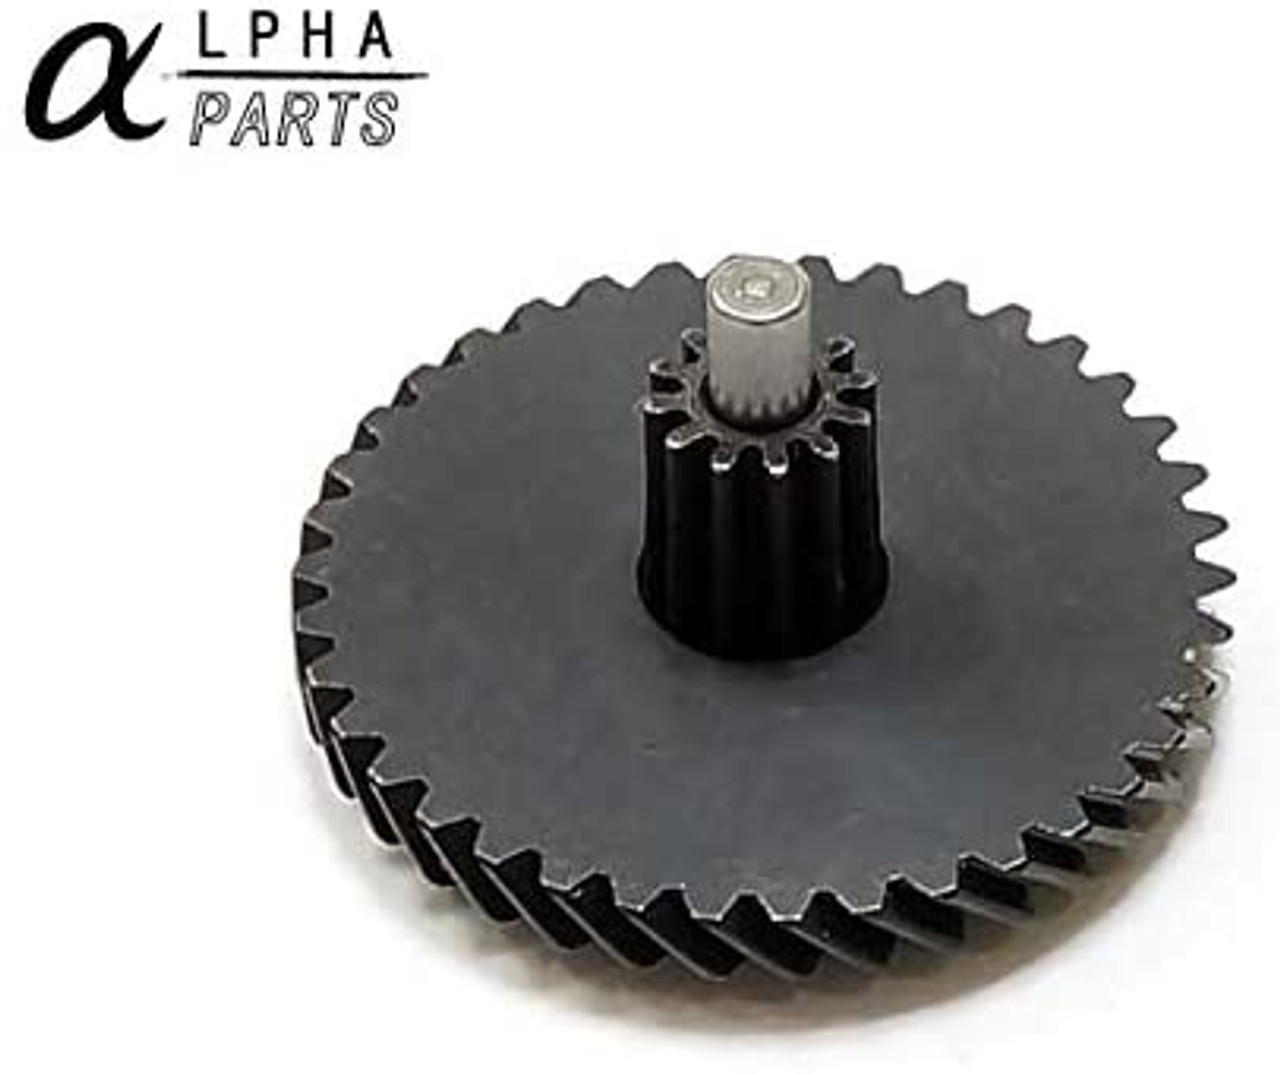 Alpha Parts CNC Custom Gear Set for SYSTEMA Professional Training Weapon